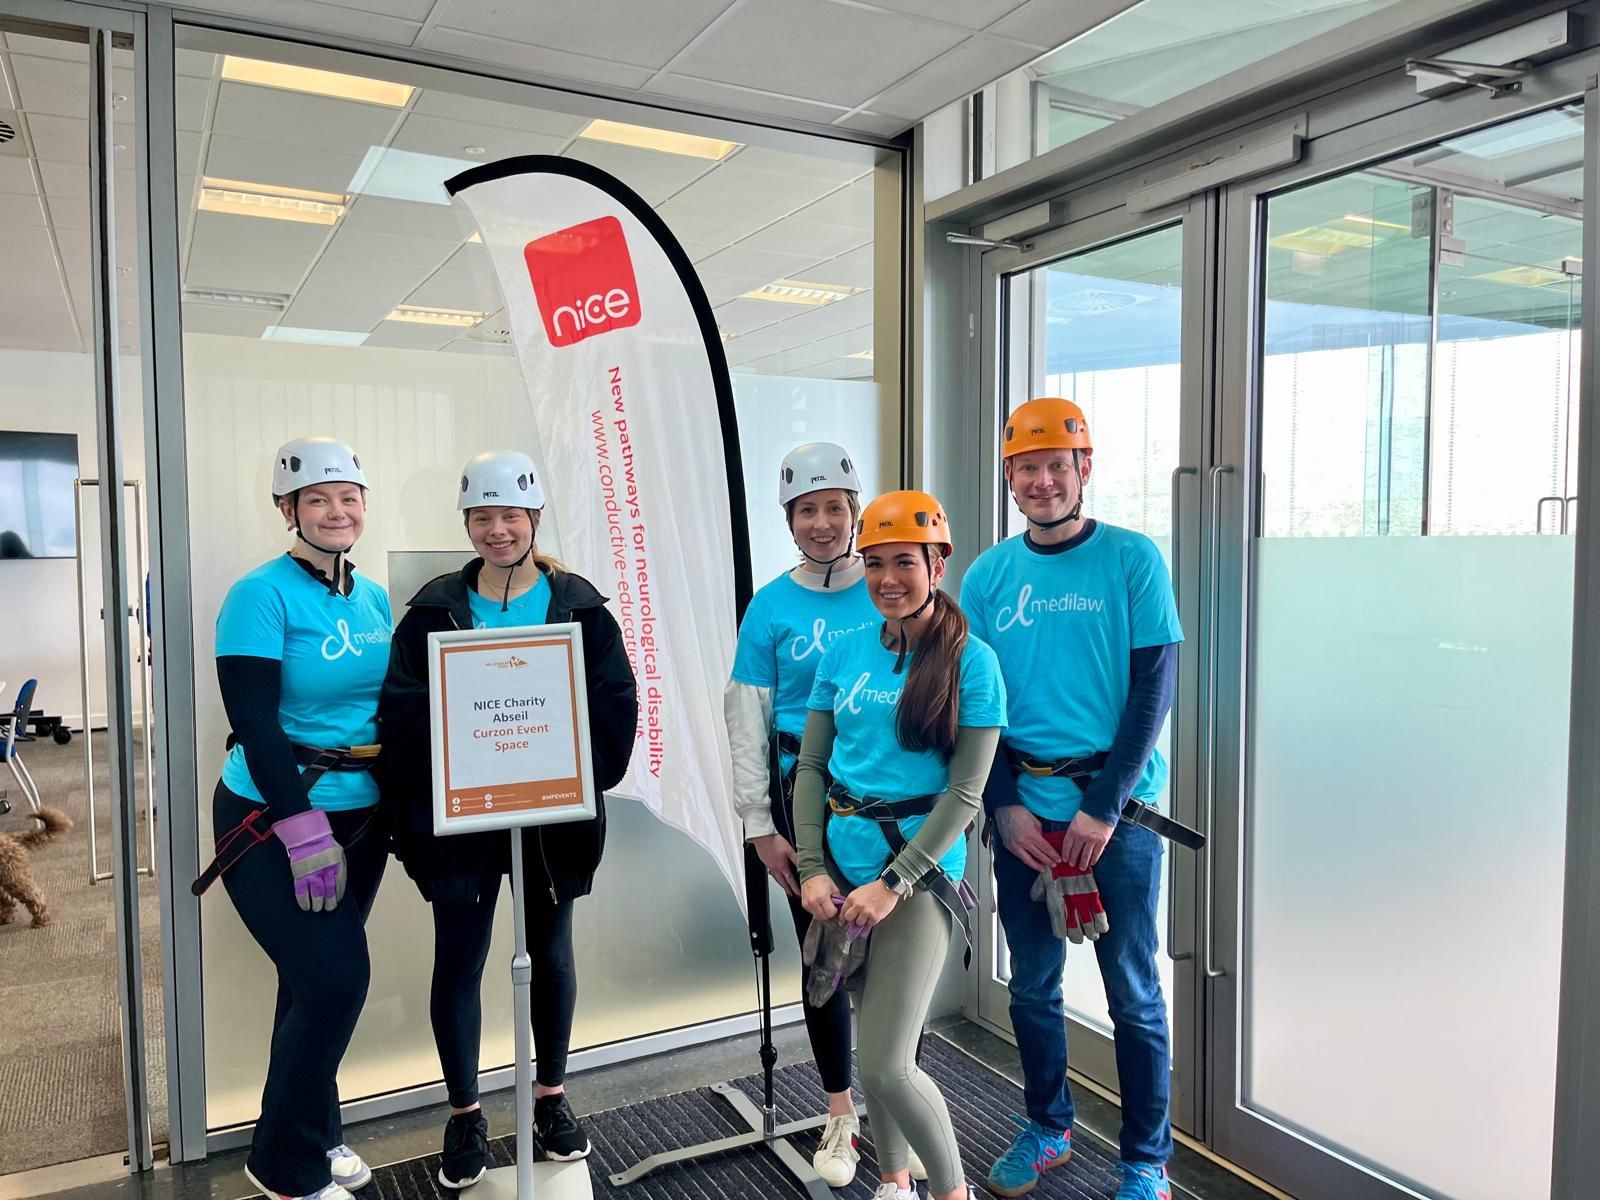 The CL Medilaw abseil team with the NICE charity banner